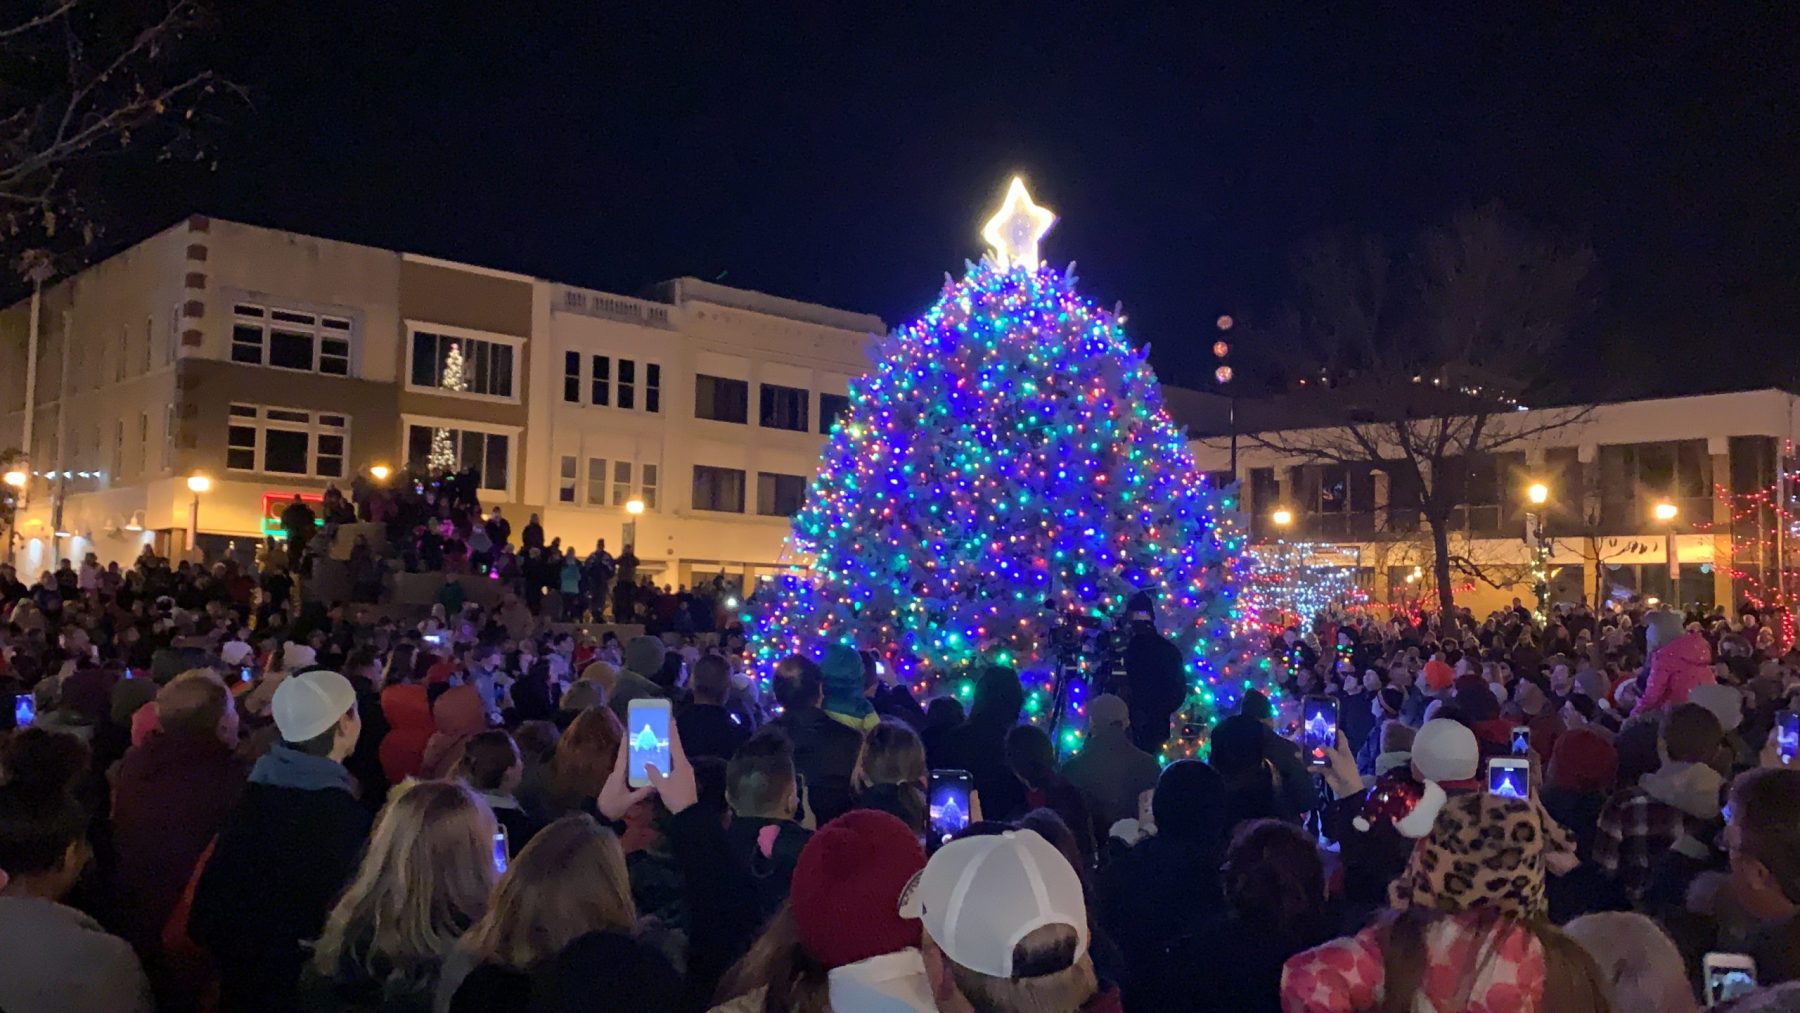 A crowd gathers around a 30-foot-tall Christmas tree